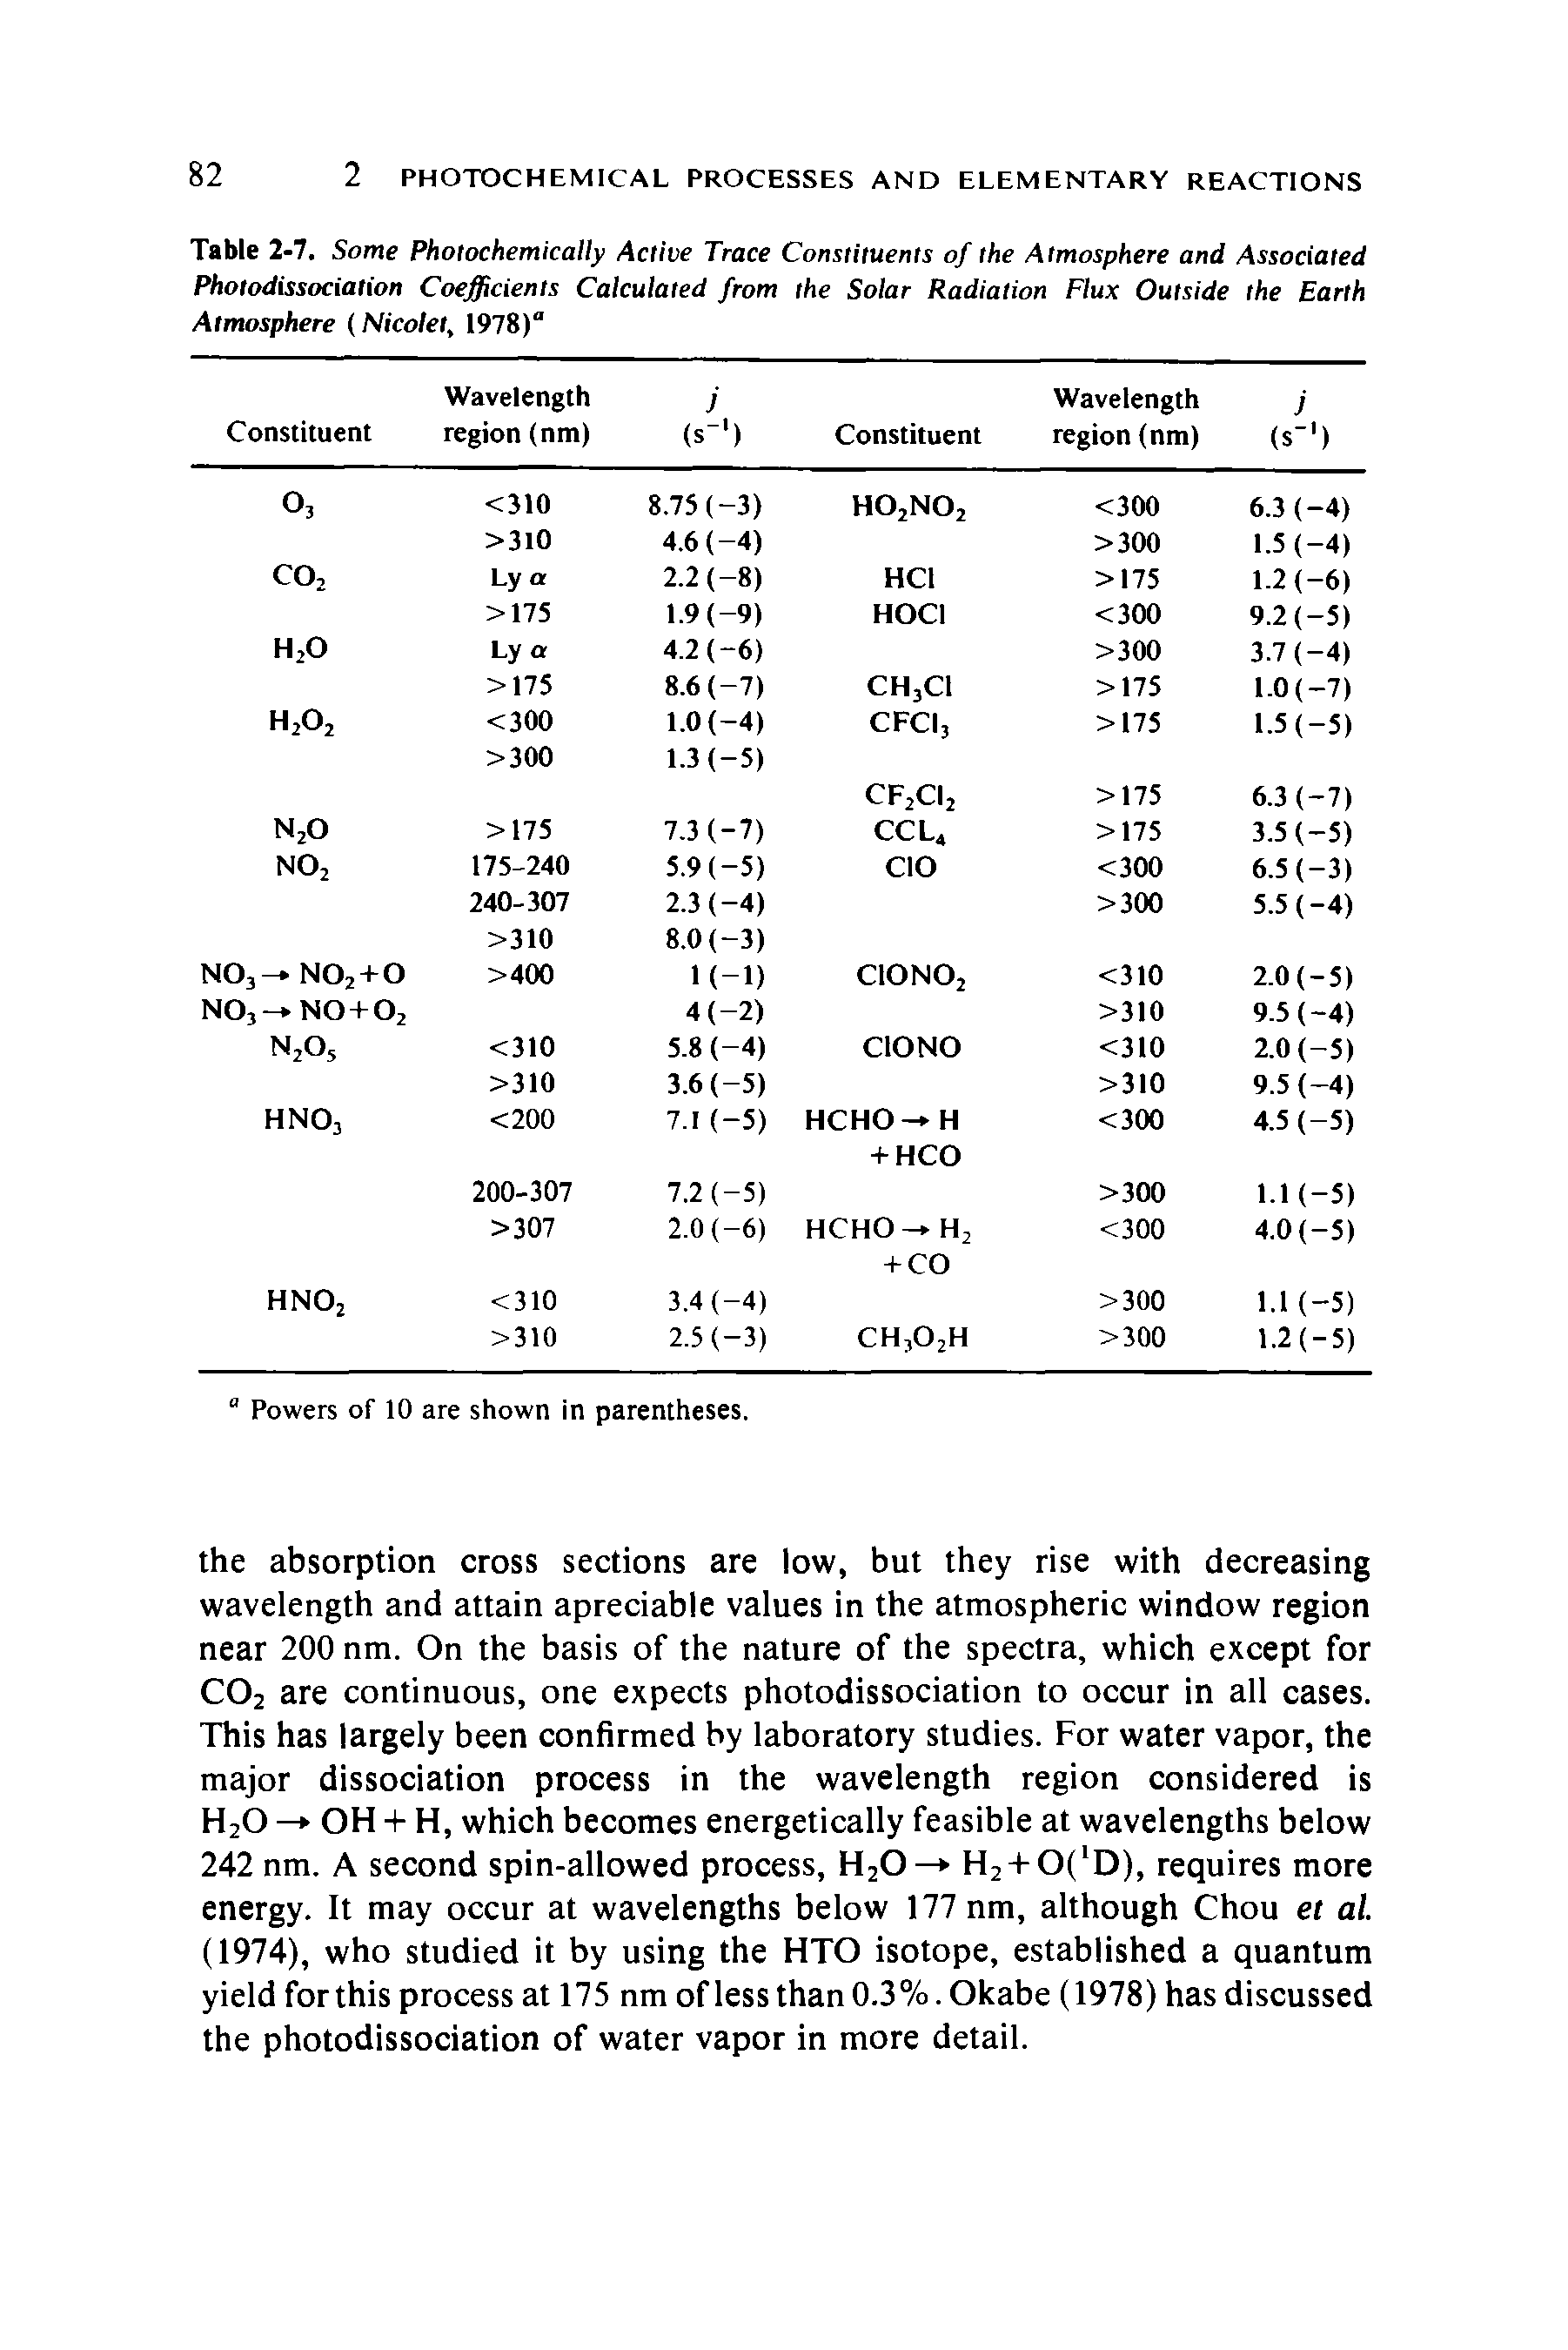 Table 2-7. Some Photochemically Active Trace Constituents of the Atmosphere and Associated Photodissociation Coefficients Calculated from the Solar Radiation Flux Outside the Earth Atmosphere (Nicolet, 1978) ...